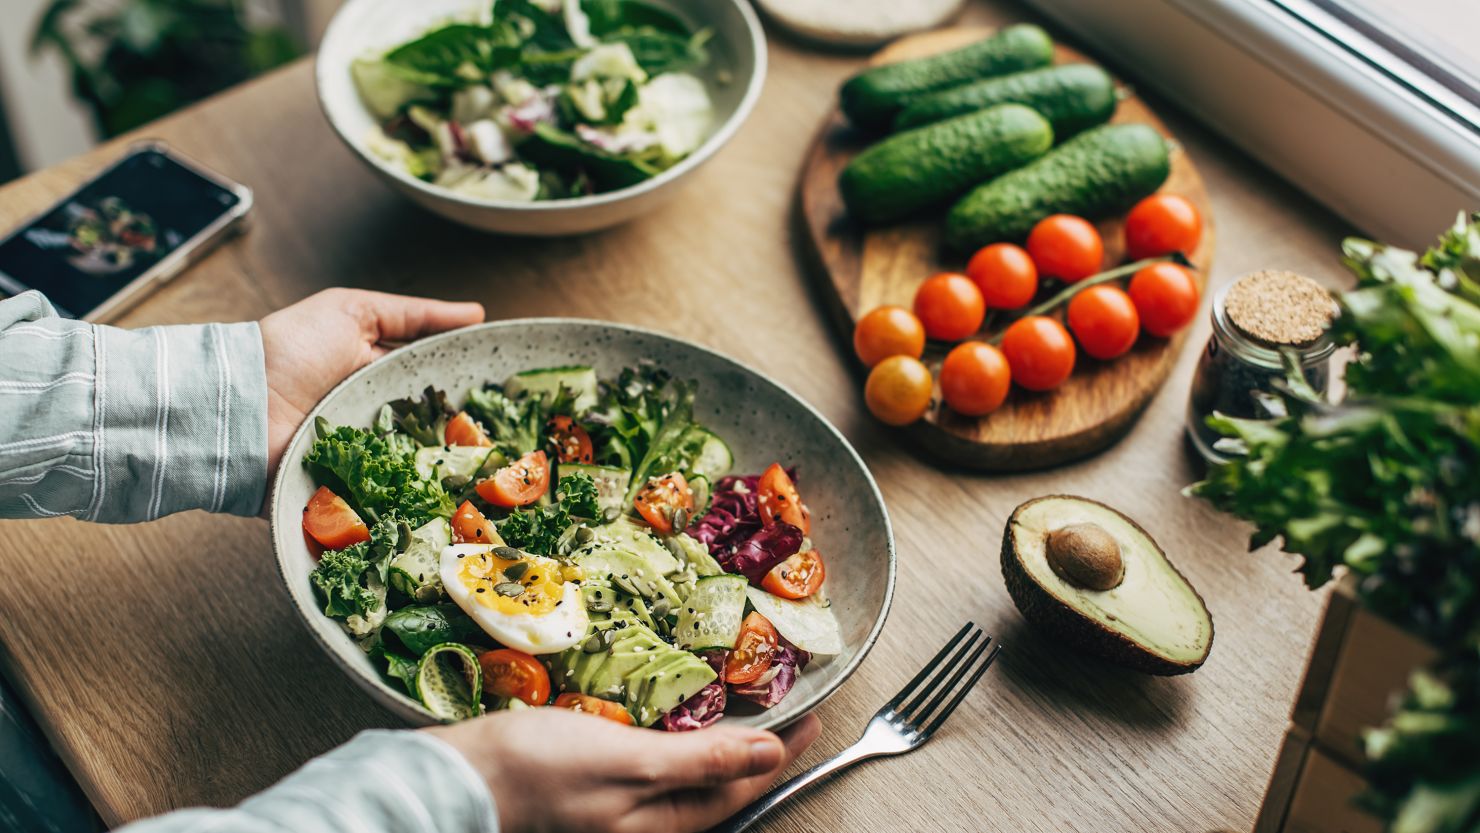 Restrictive diets can impact your social life, nutrition and relationship with food, said therapist Jennifer Rollin of The Eating Disorder Center in Rockville, Maryland.